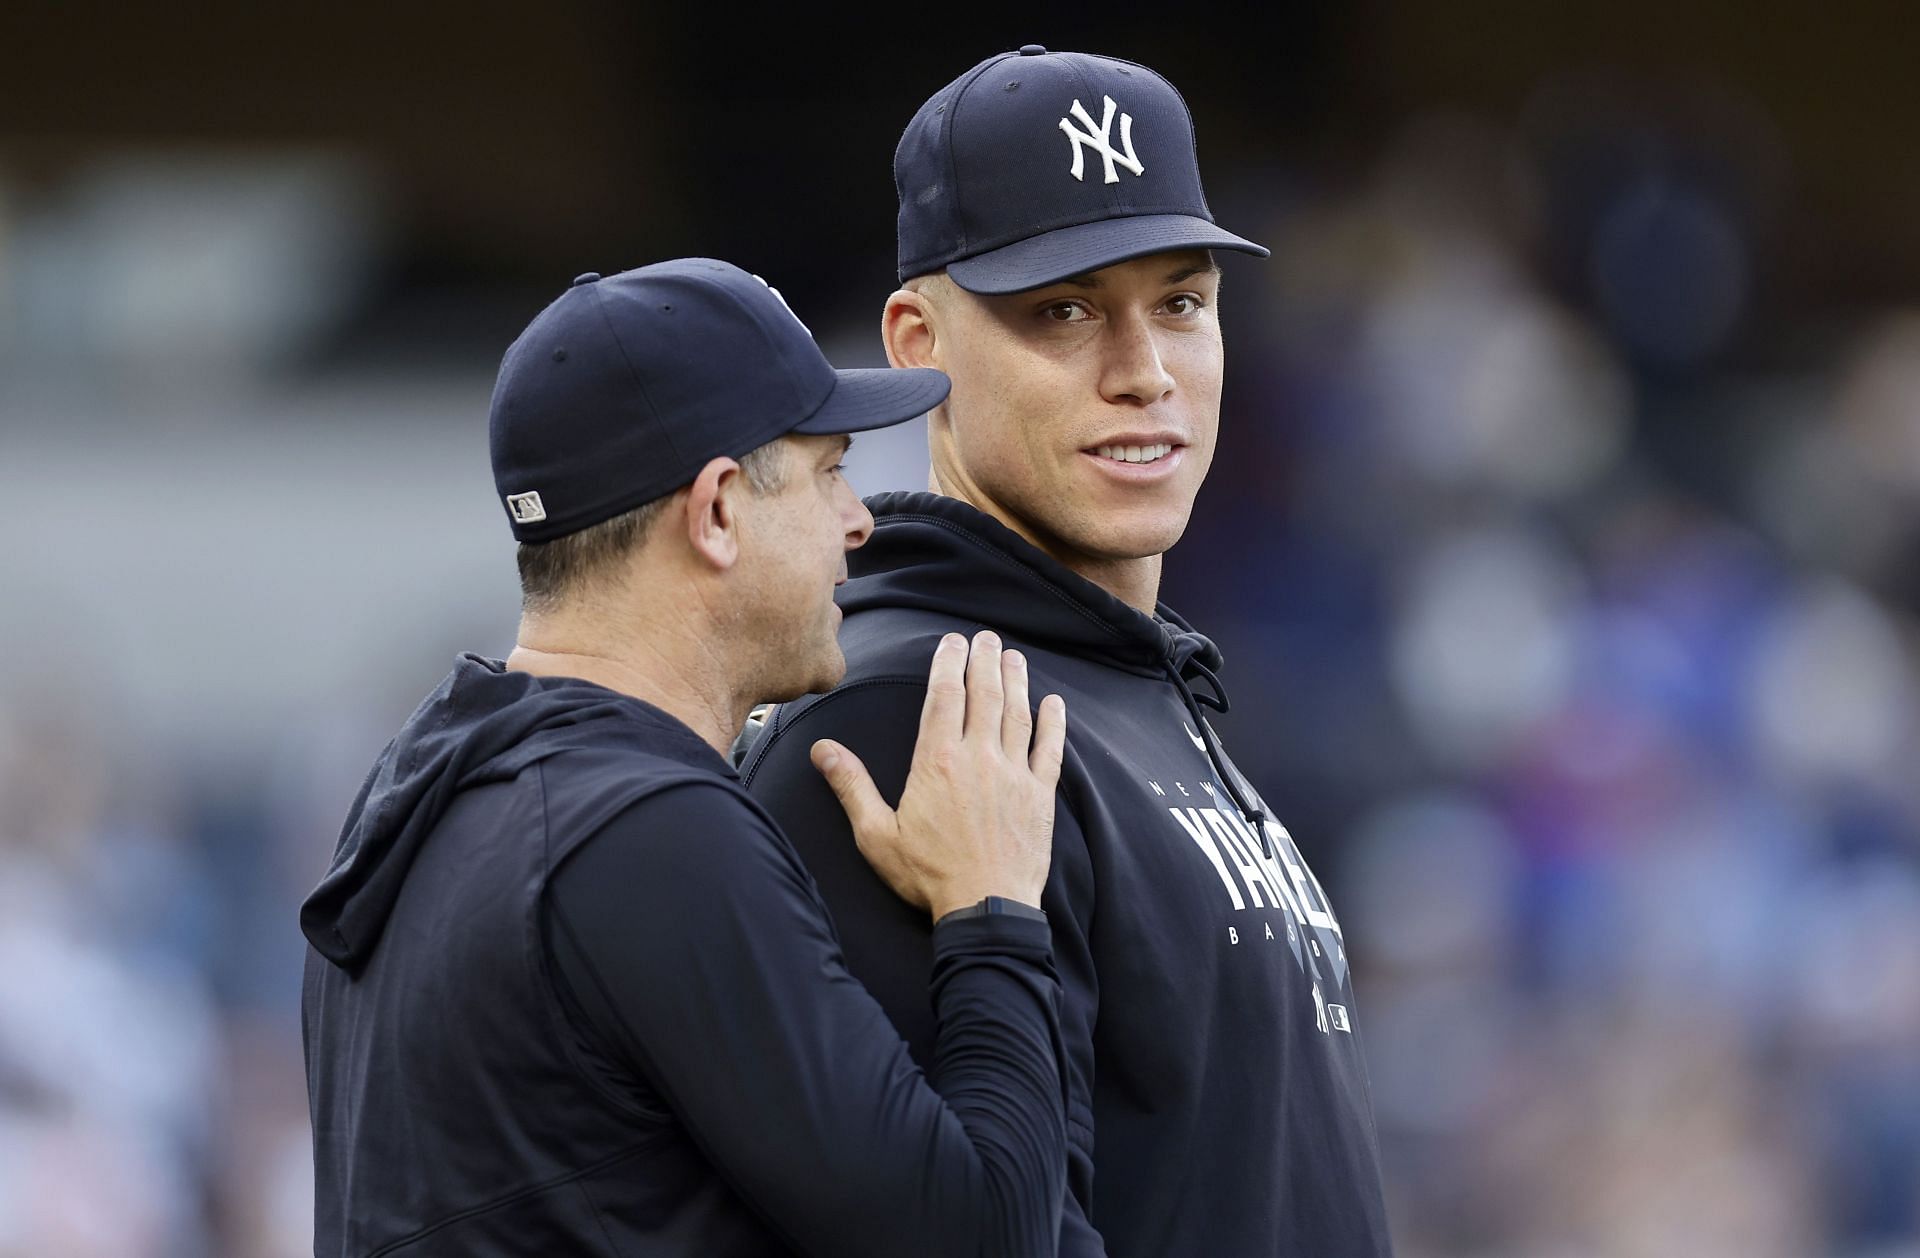 Aaron Judge could be close to a return